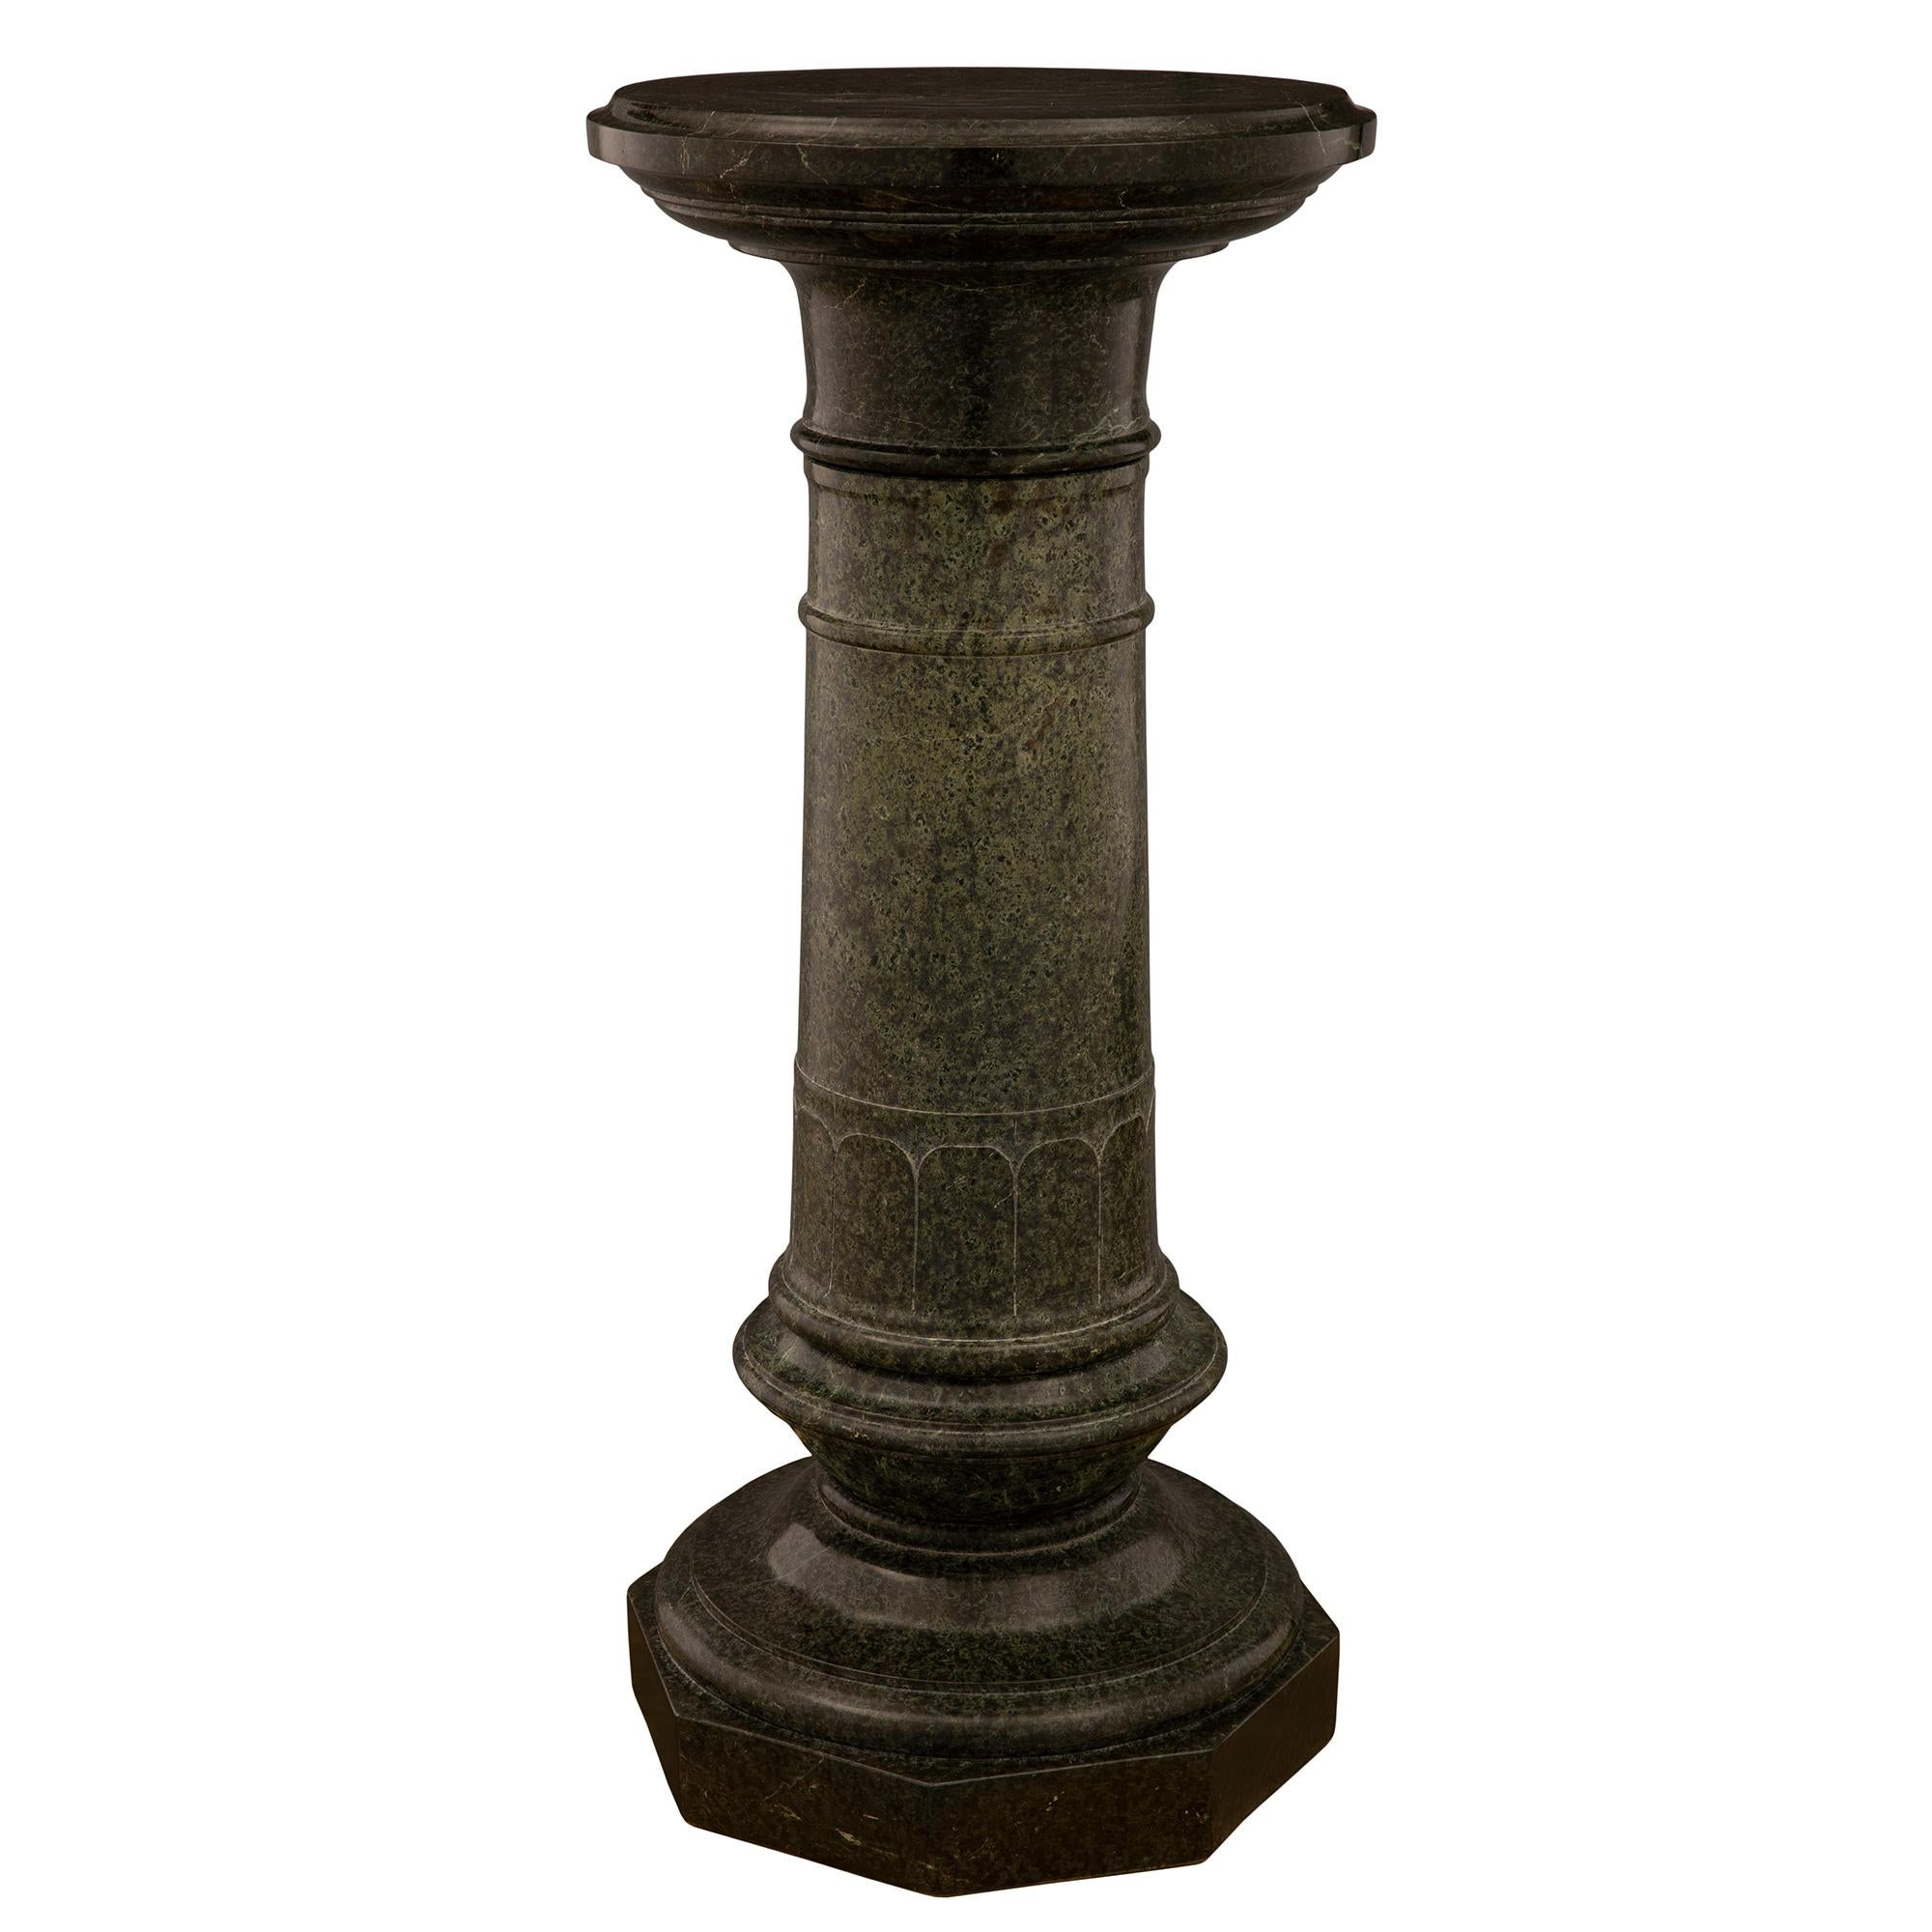 A fine French 19th century Louis XVI St. Vert de Patricia marble pedestal column. The pedestal is raised by an octagonal base below a socle pedestal with an elegant mottled border. The lightly tapered central support displays a sculpted arched